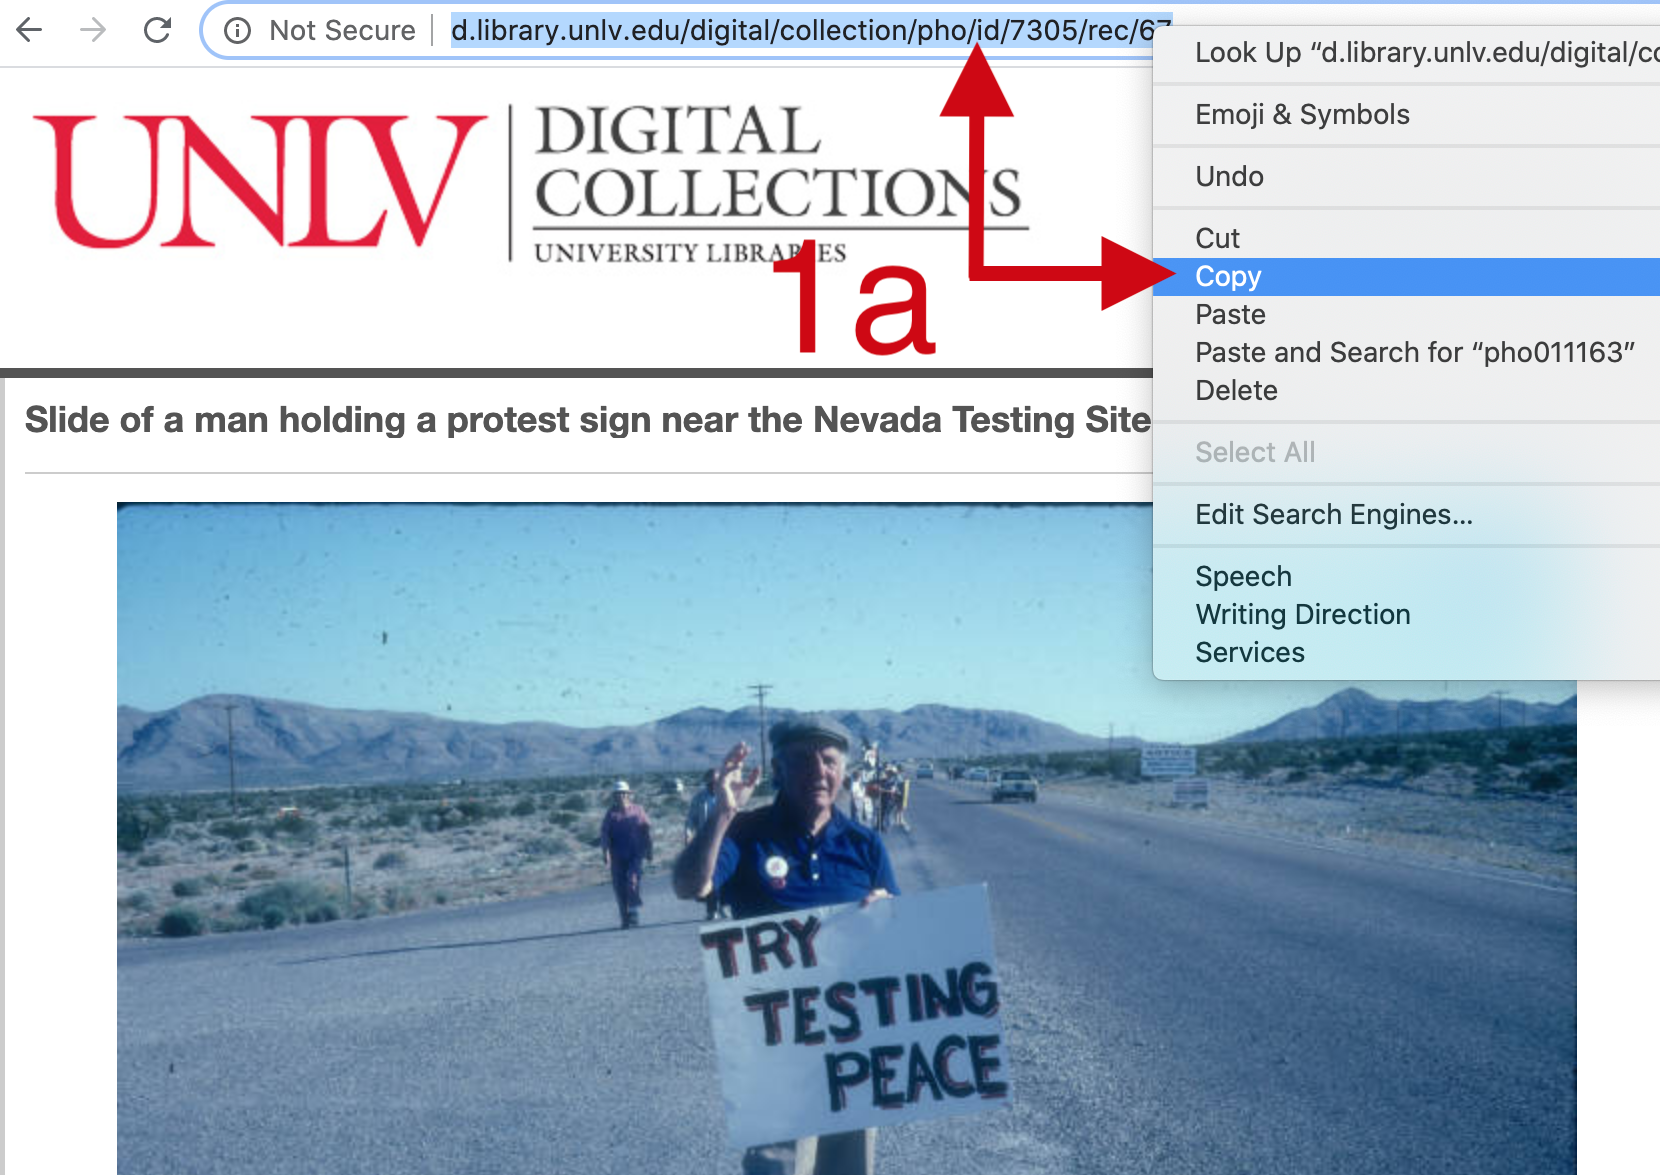 Screenshot demonstrating copying the URL from the address bar on the Digital Collections pages